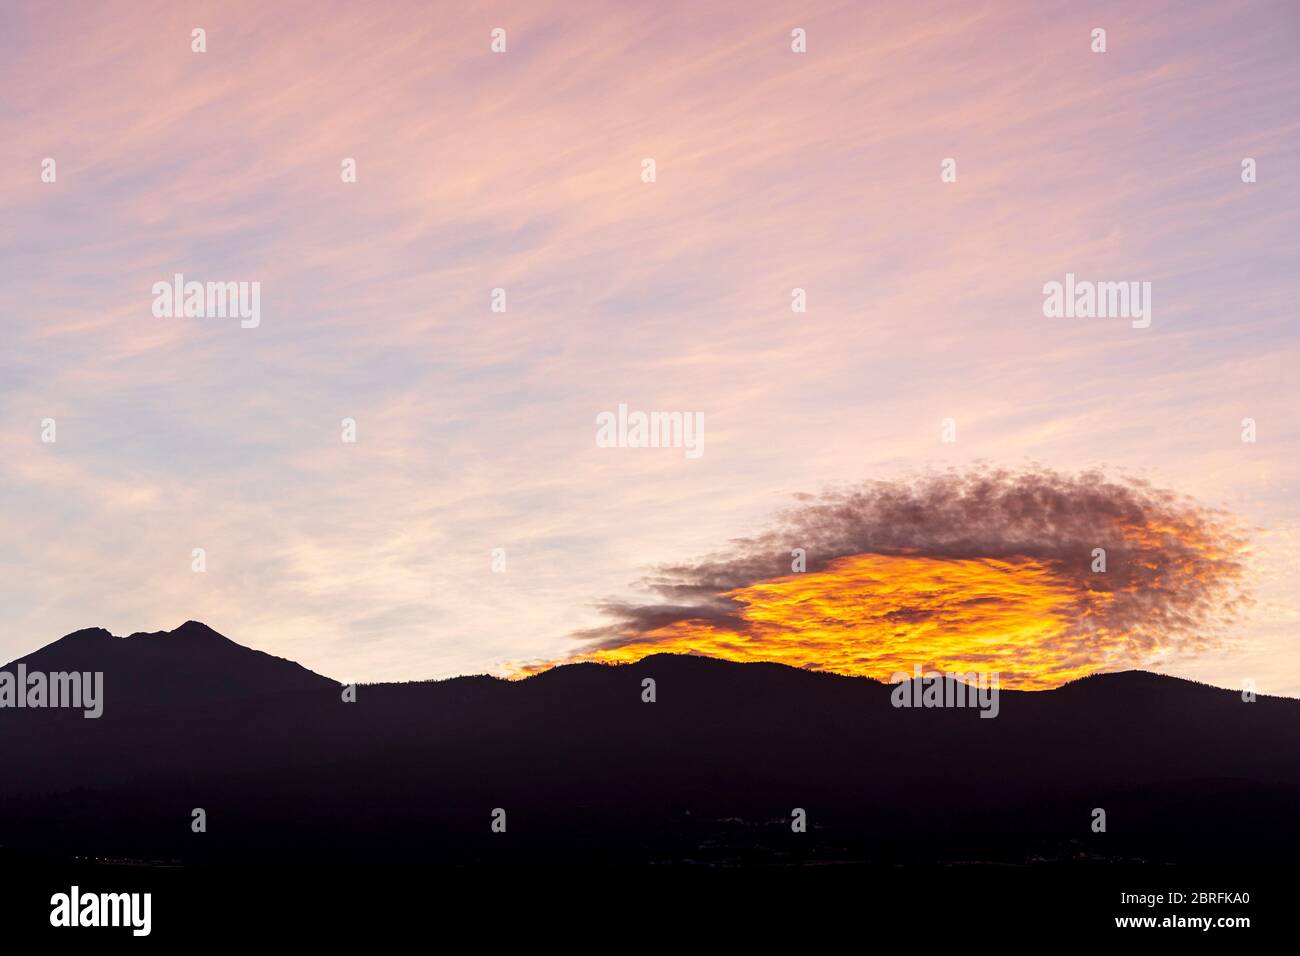 Pre dawn light in the sky over Teide volcano with some unusual clouds, Tenerife, Canary Islands, Spain Stock Photo